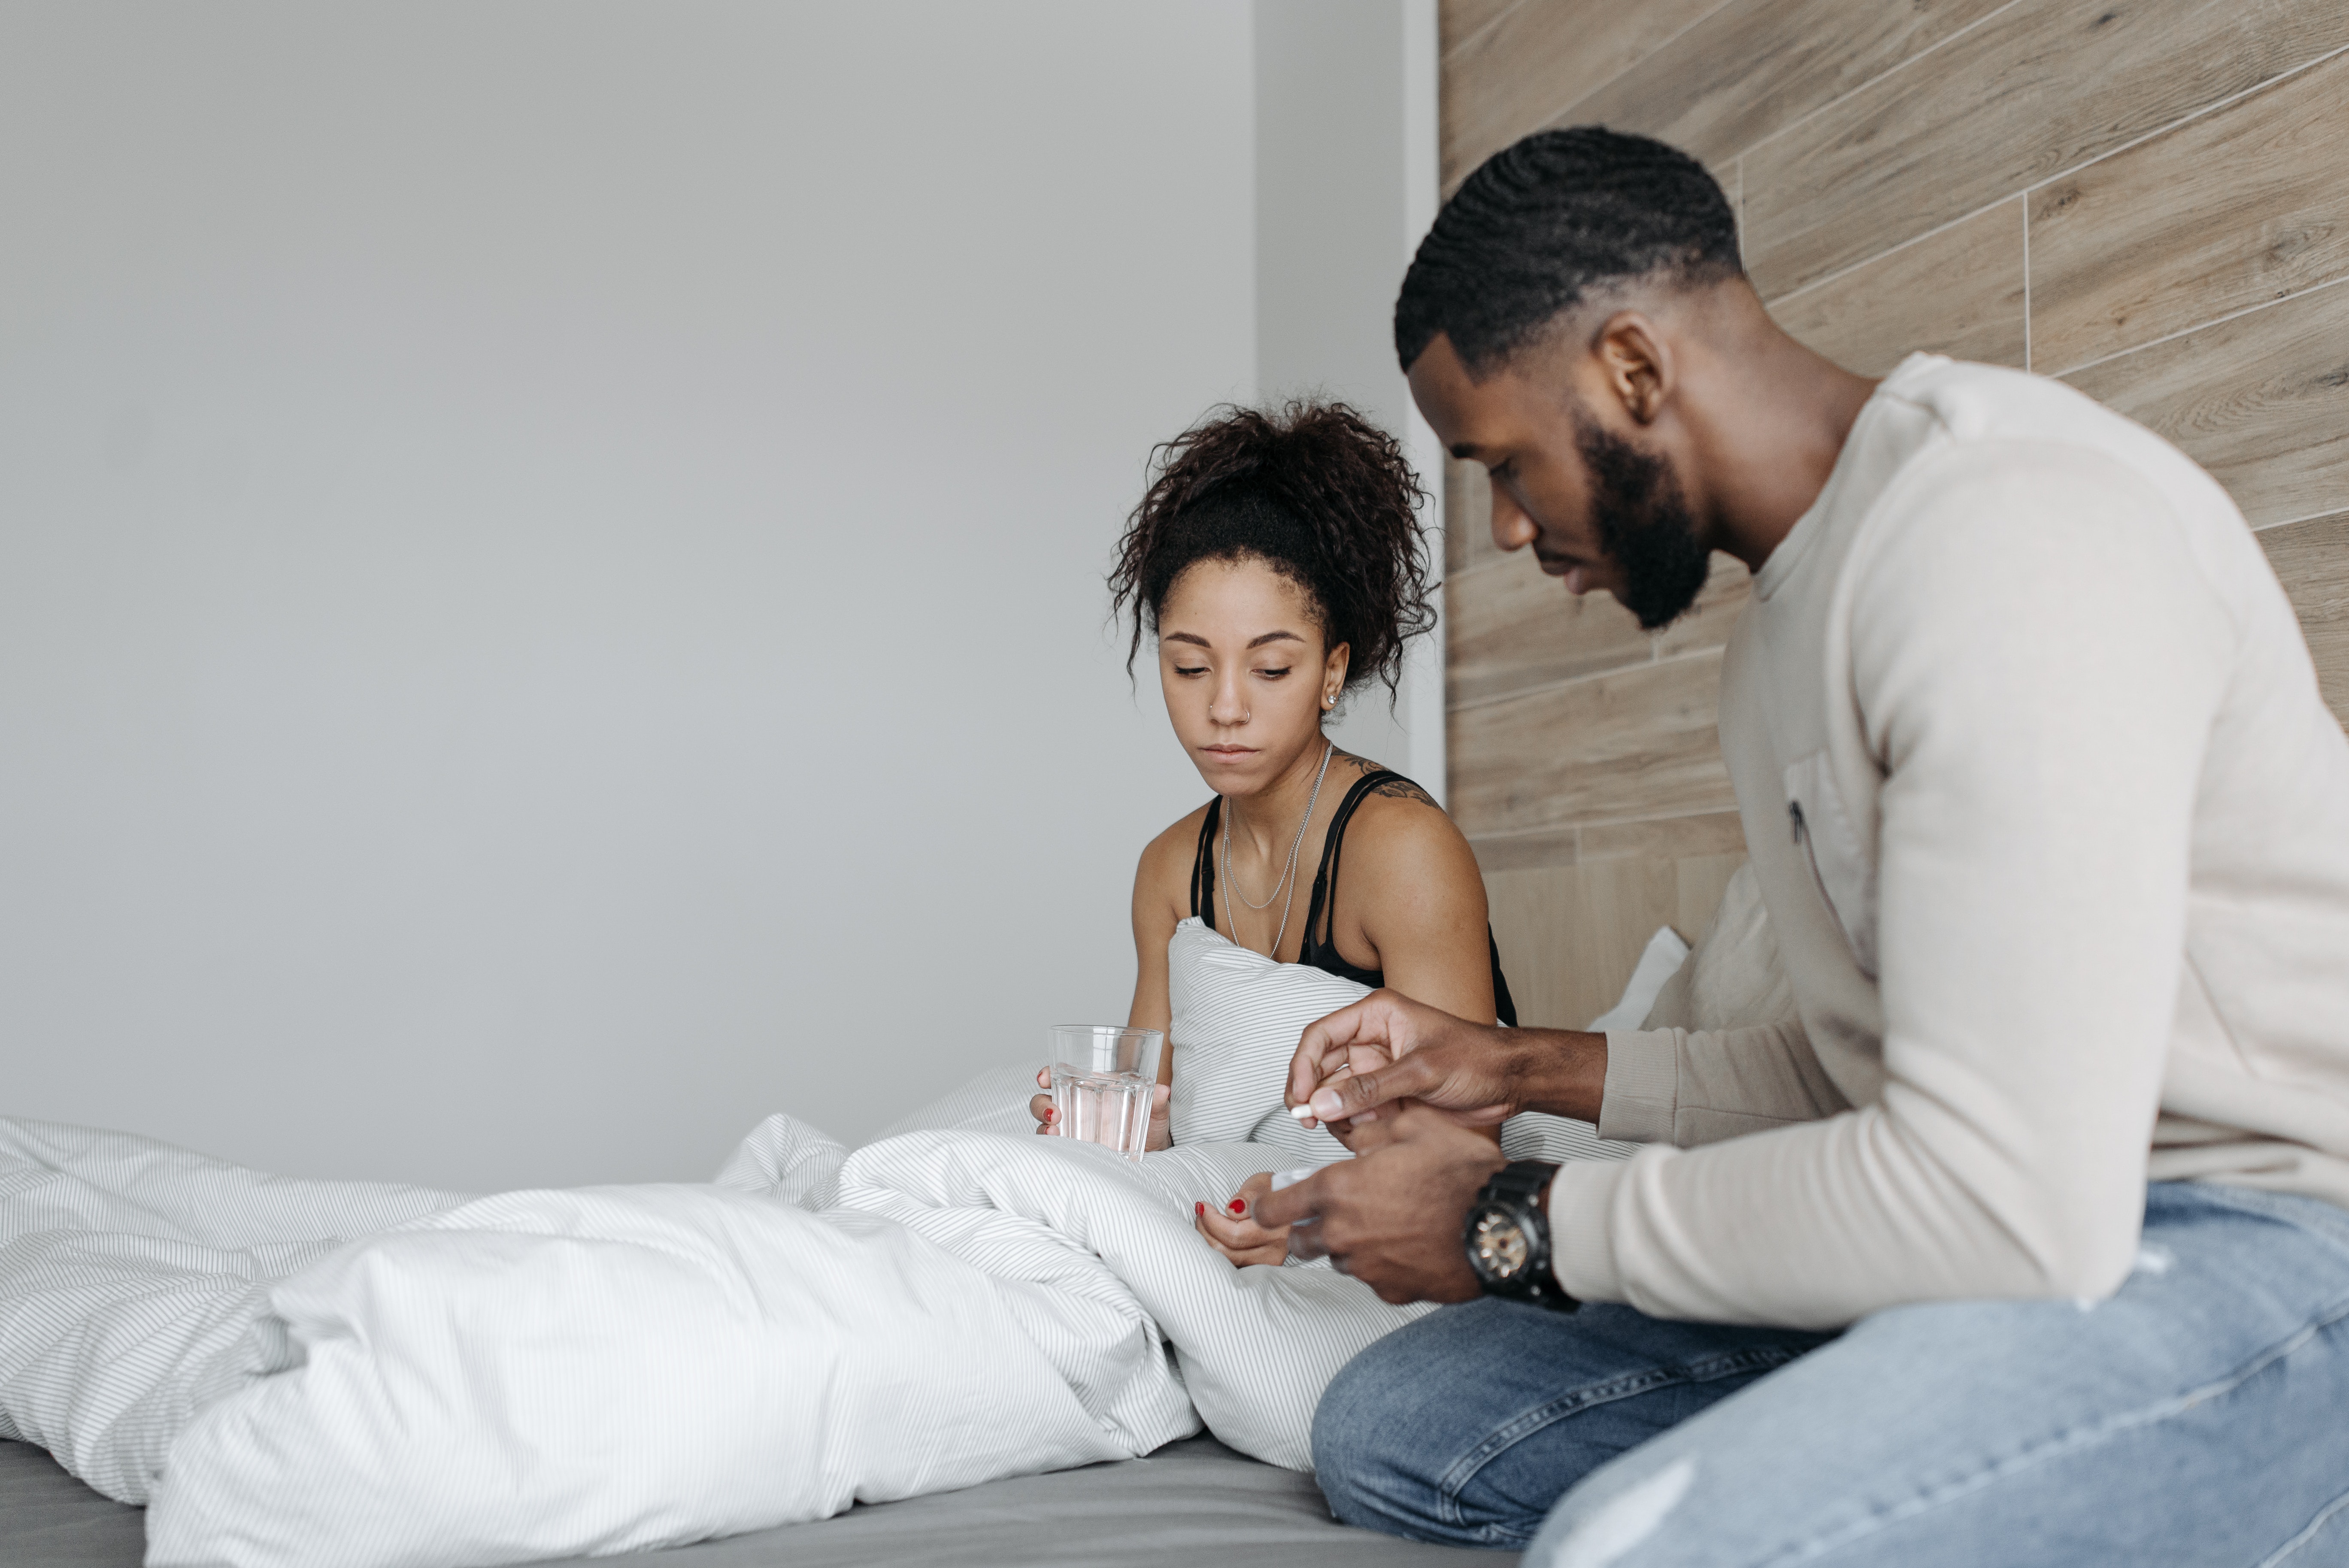 man giving woman in bed a white pill to take